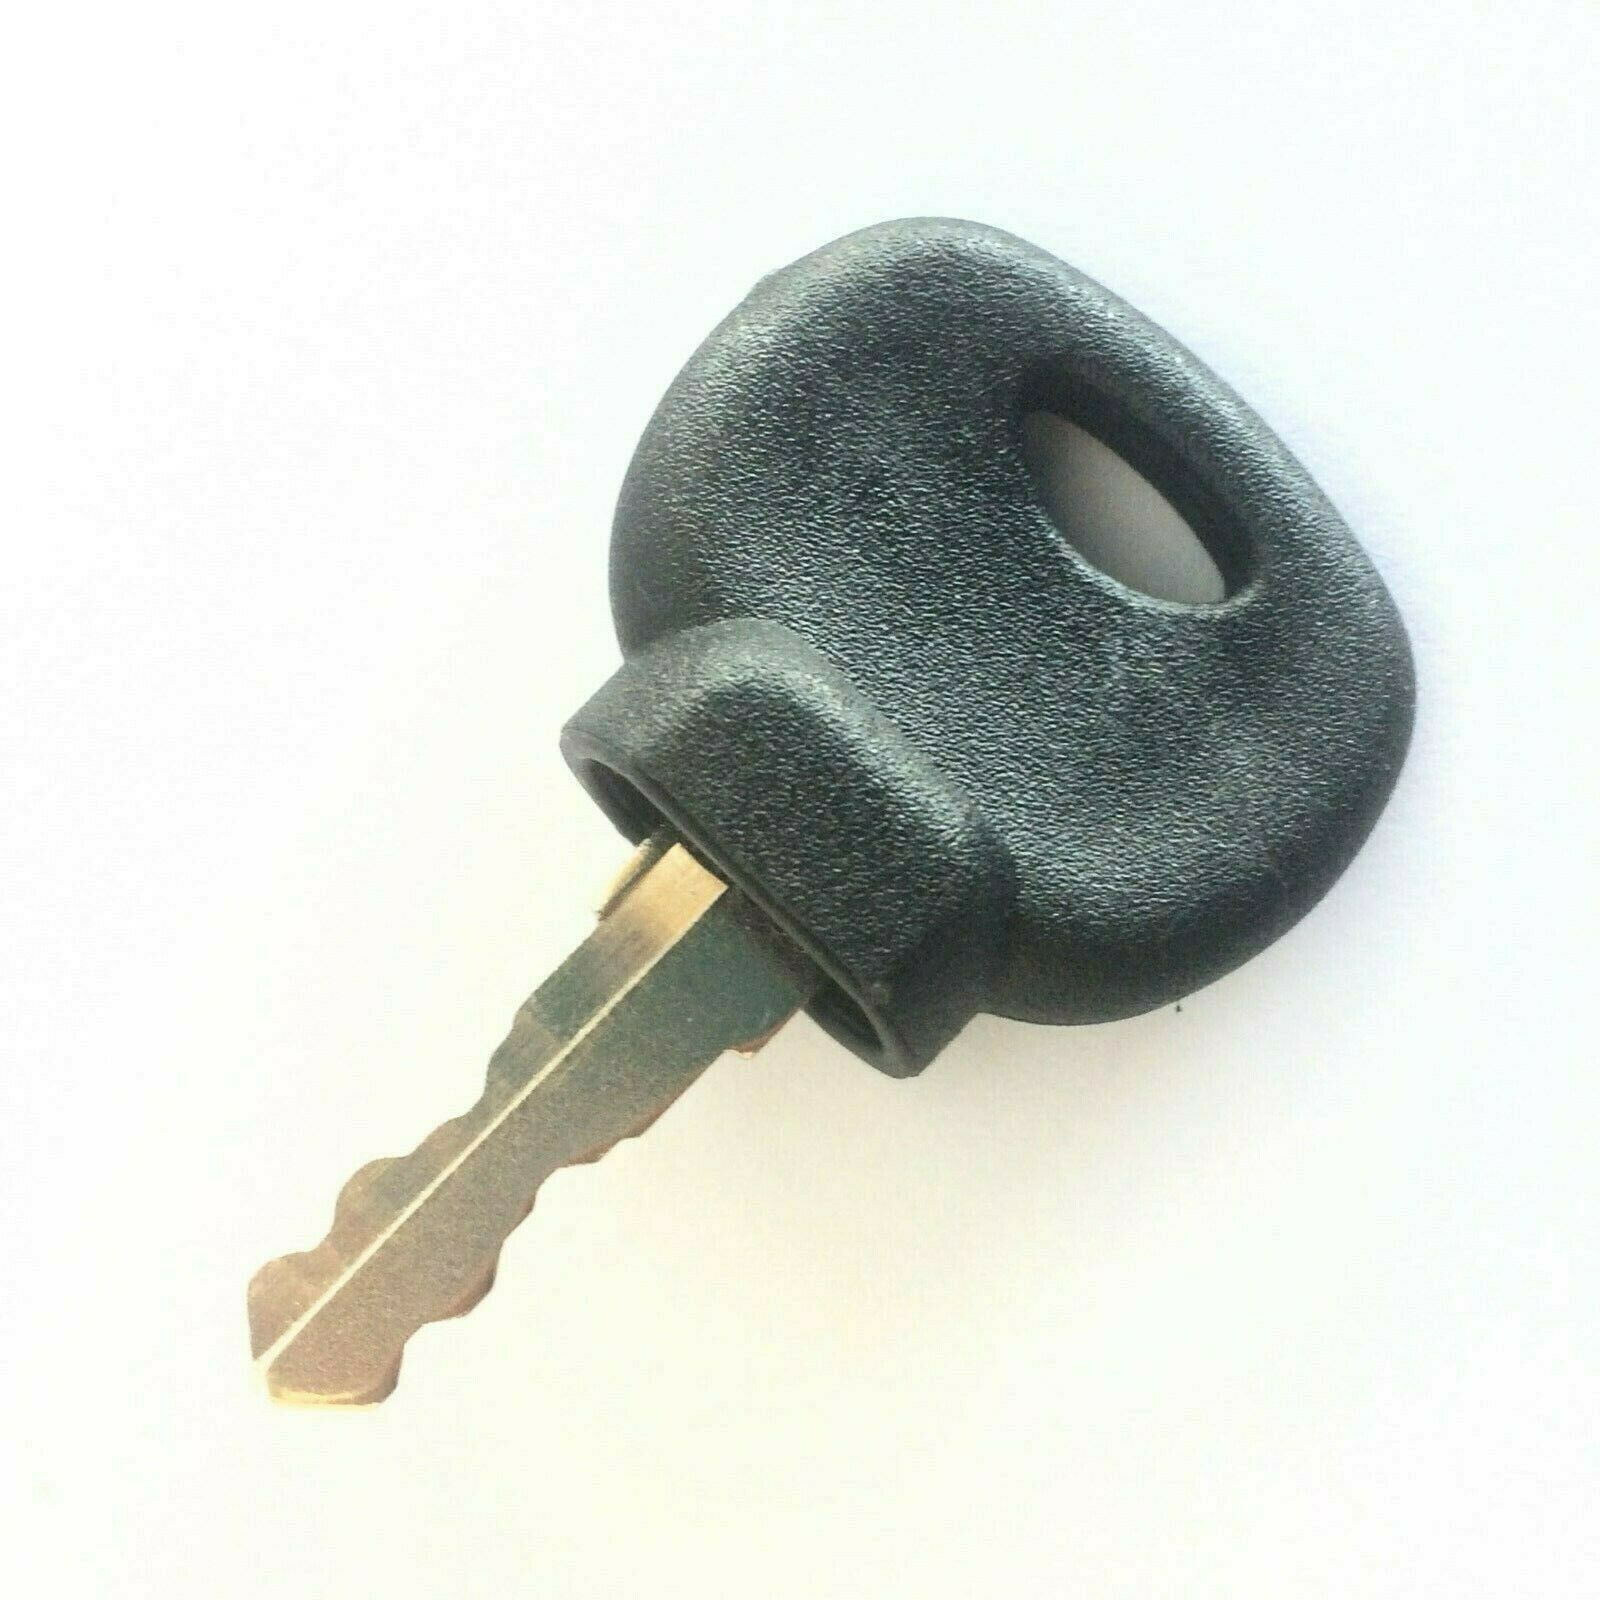 1 Piece Of New Heavy Equipment Ignition Key High Quality Black Durable